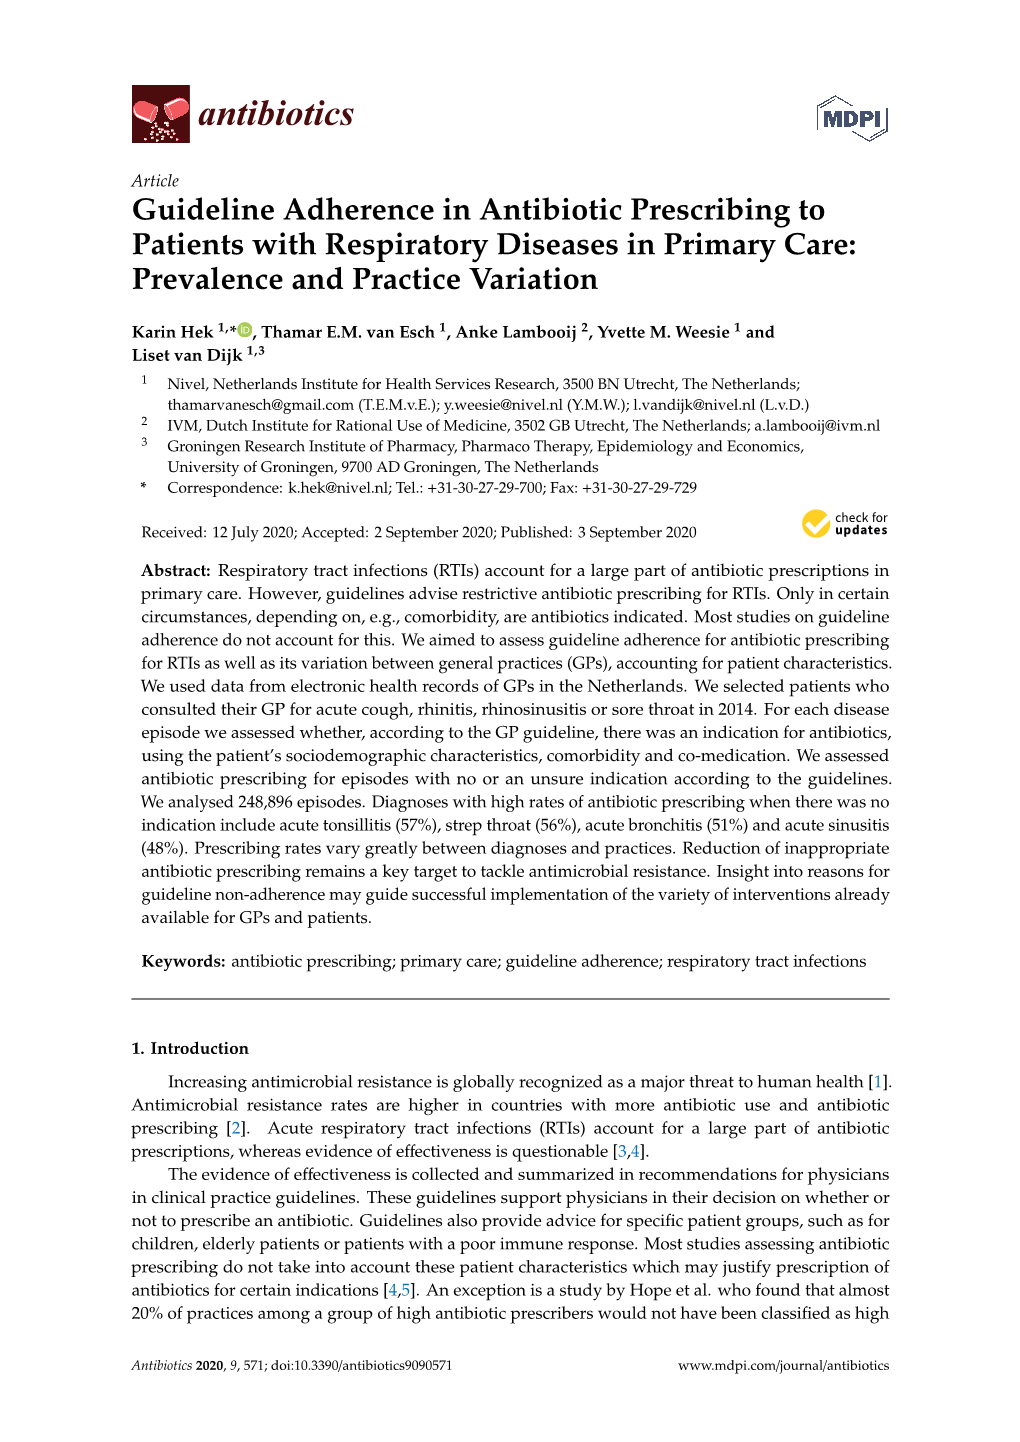 Guideline Adherence in Antibiotic Prescribing to Patients with Respiratory Diseases in Primary Care: Prevalence and Practice Variation